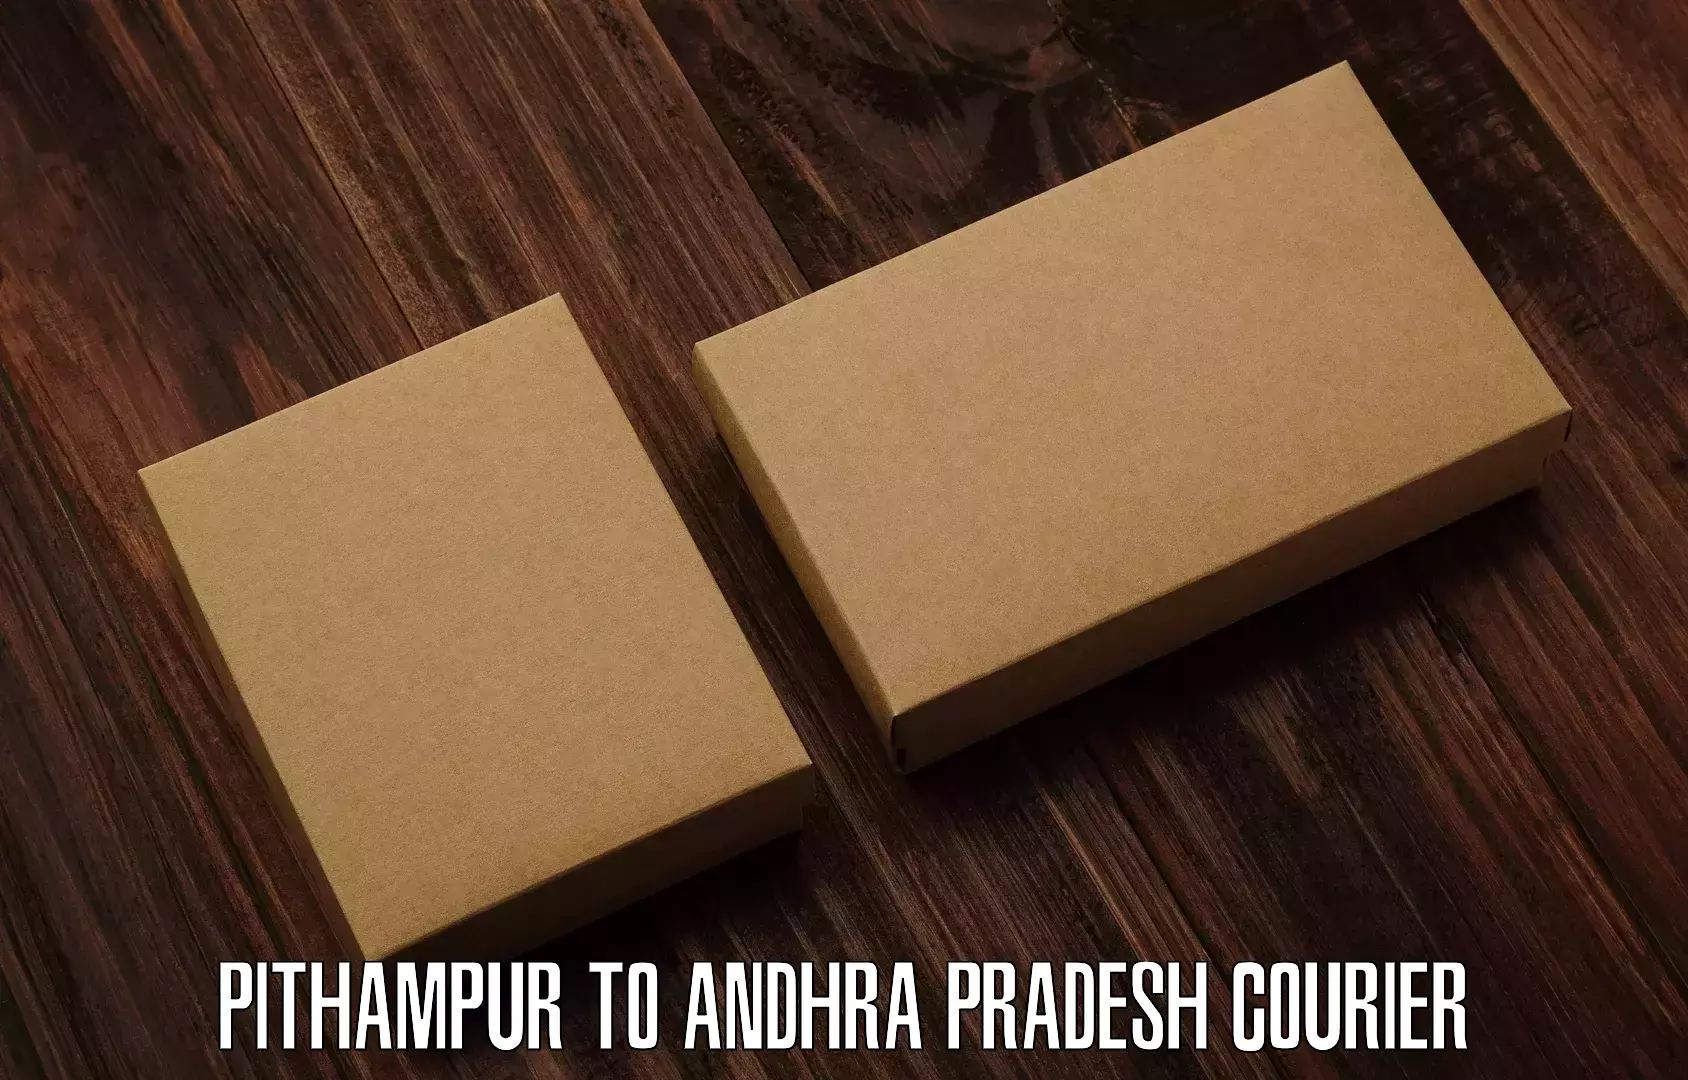 International courier networks Pithampur to Parvathipuram